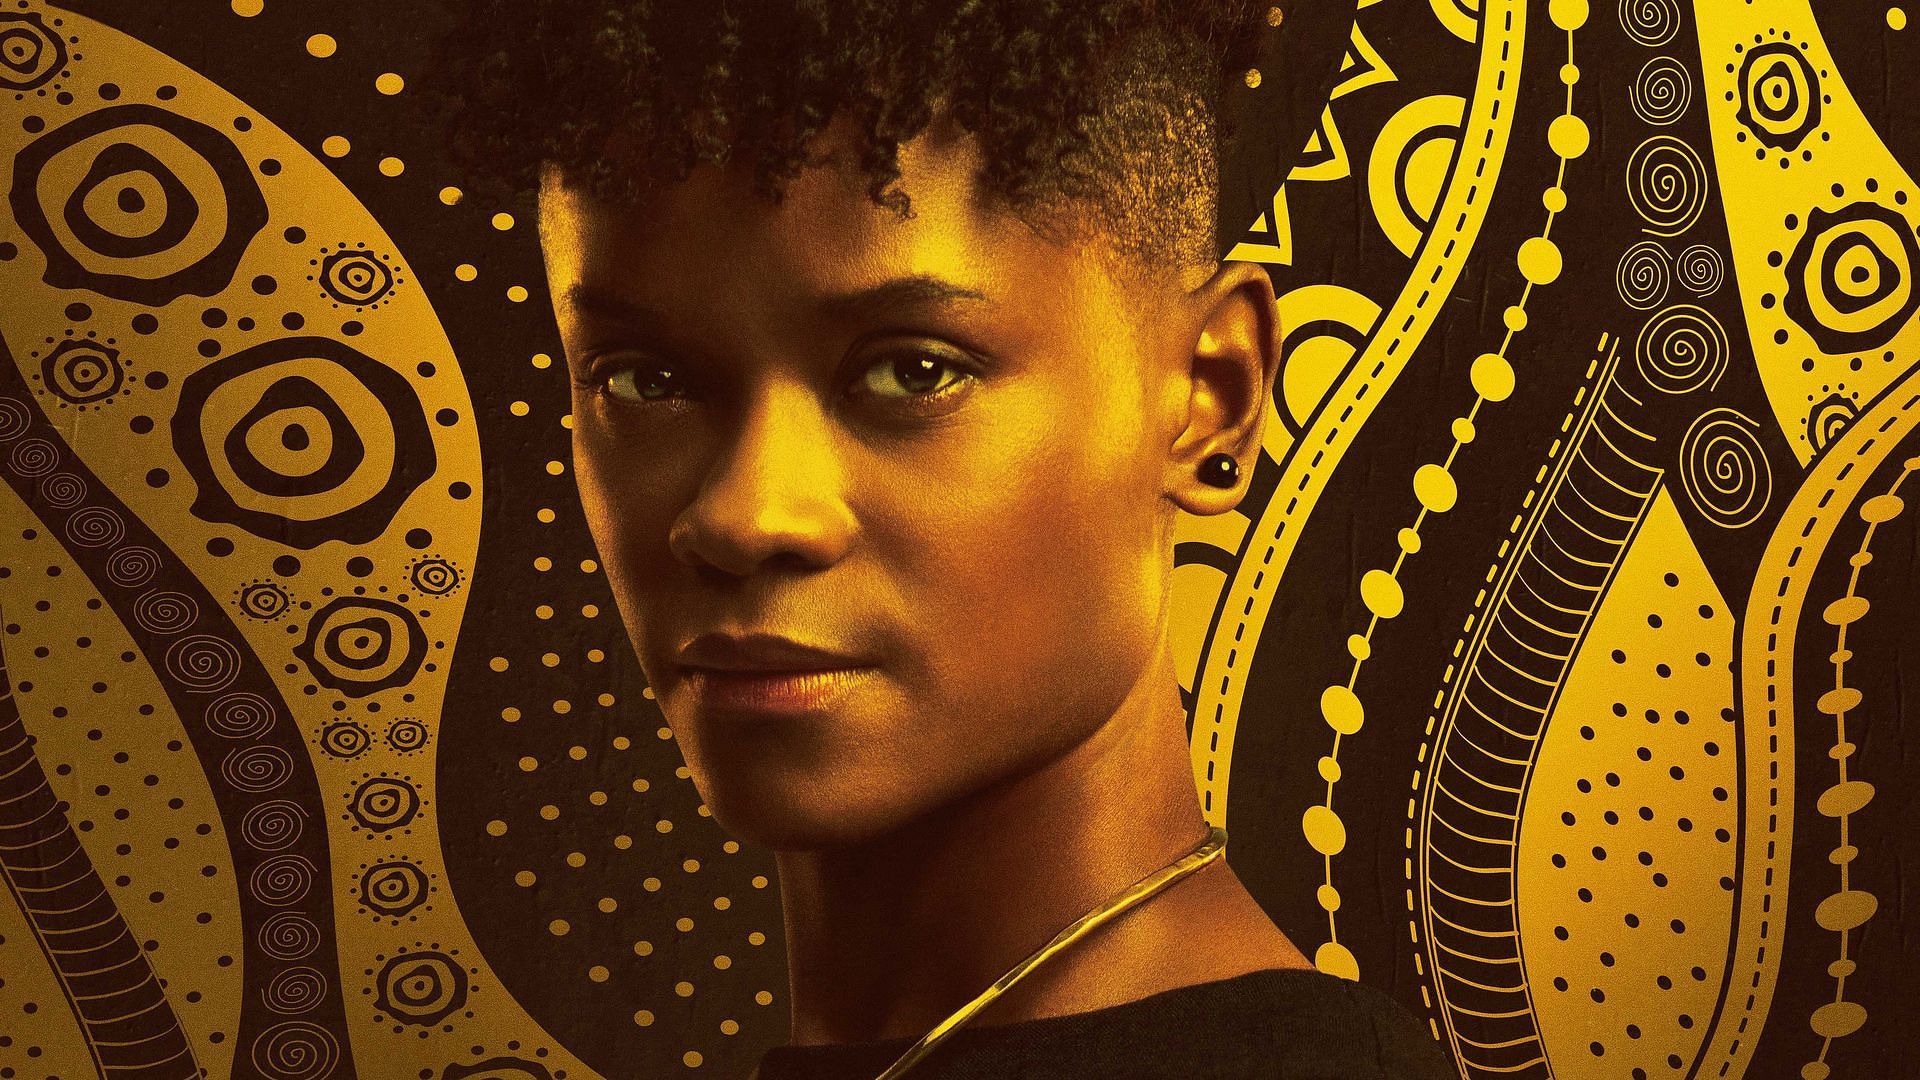 Letitia Wright as Shuri in a Black Panther: Wakanda Forever poster (Image via Marvel Studios)